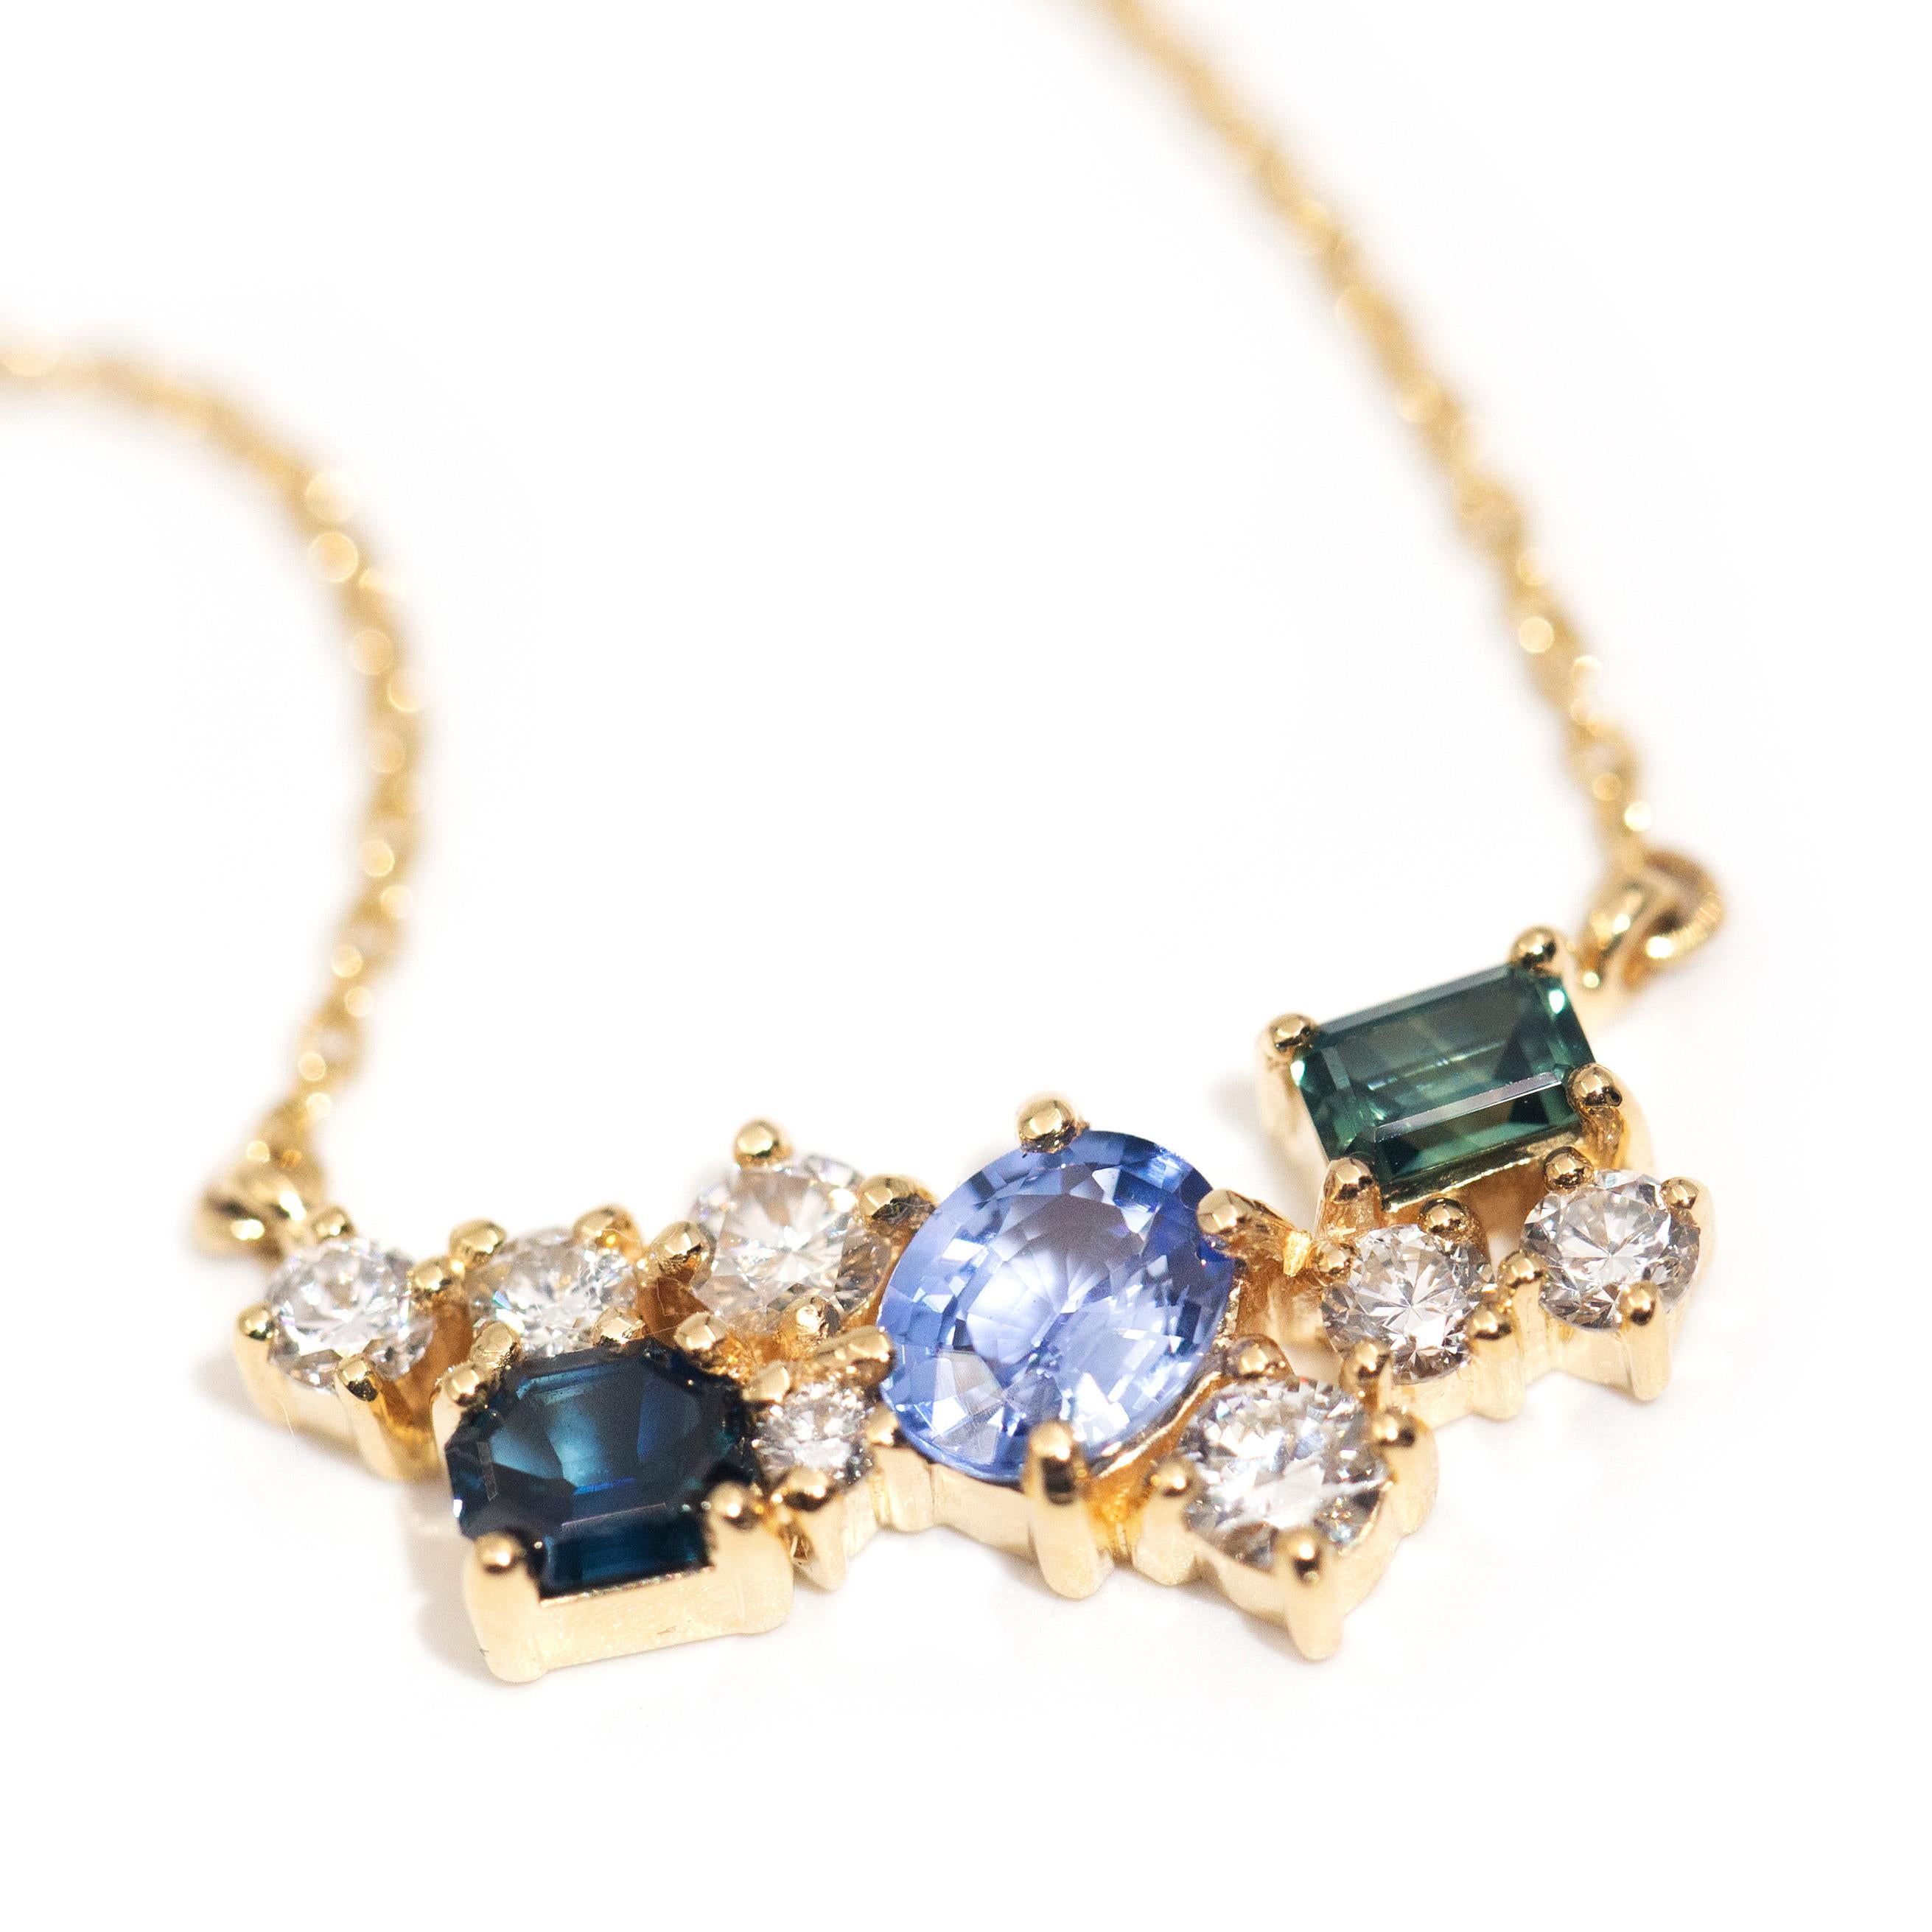 Forged in 18 carat yellow gold, this elegant contemporary necklet is an exquisite delight with her gorgeous diamonds alluring bright blue Ceylon sapphire flanked by a pair of Australian emerald cut sapphires. We have named this graceful adornment